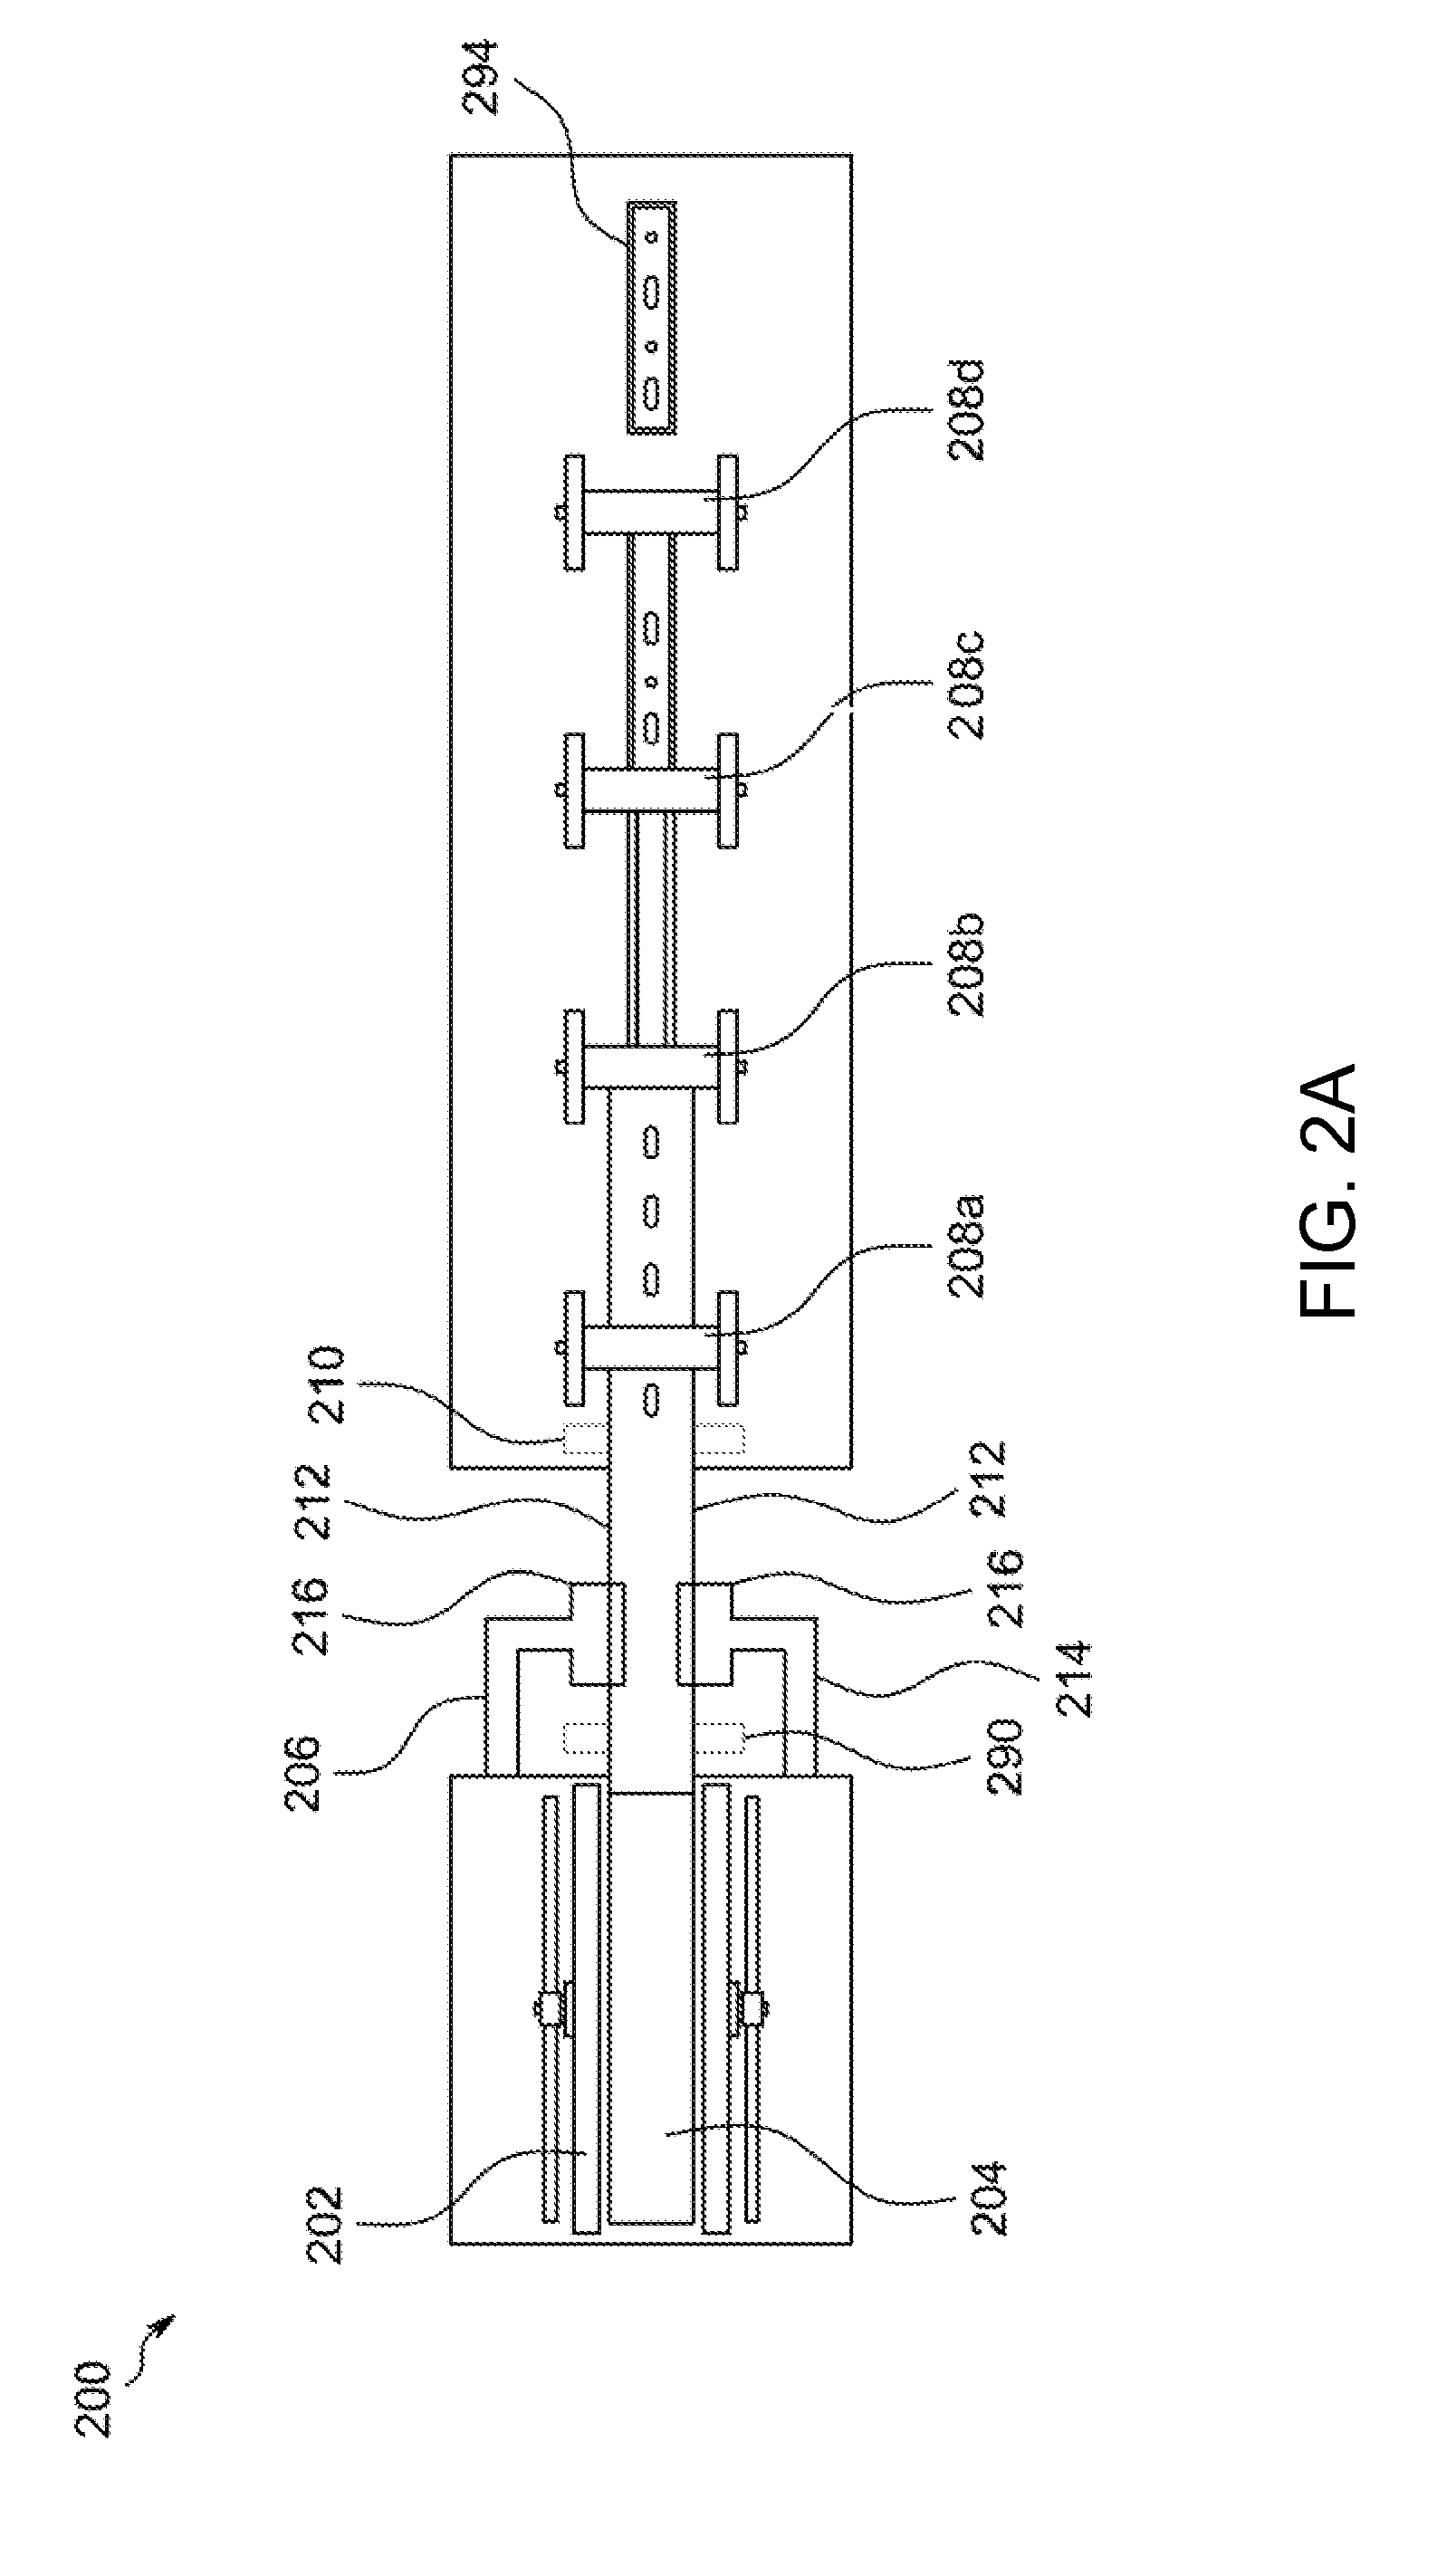 An apparatus and method for manufacturing a steel component